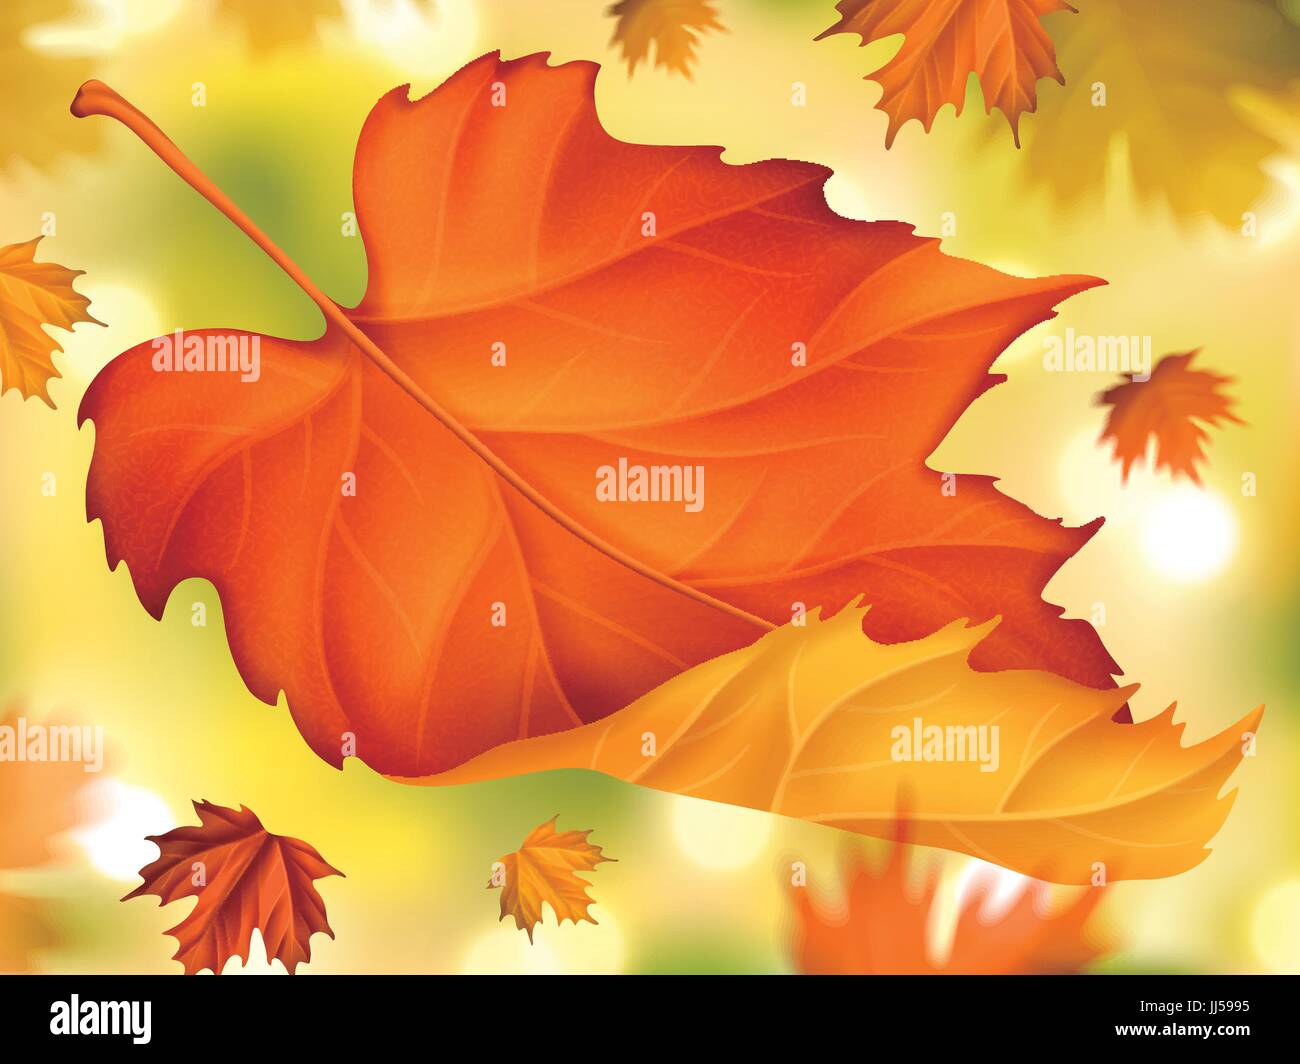 Elegant fall foliage background, close up autumn maples with bokeh background in 3d illustration Stock Vector